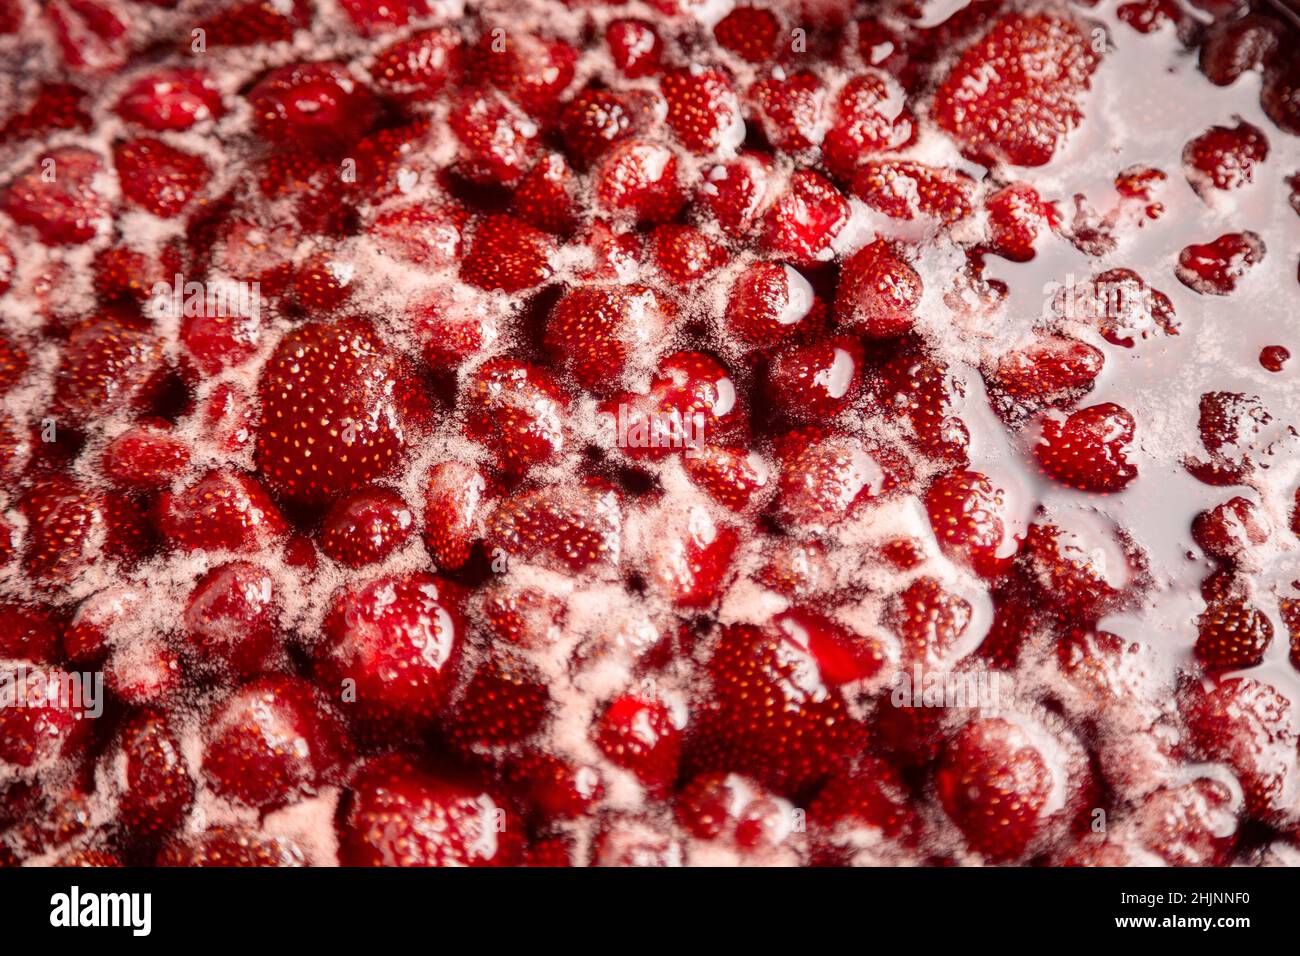 Strawberry jam, top view. Homemade Strawberry jam in making progress boiling. Boiling strawberry jam close up. Strawberry jam is boiling, detailed shooting. Stock Photo